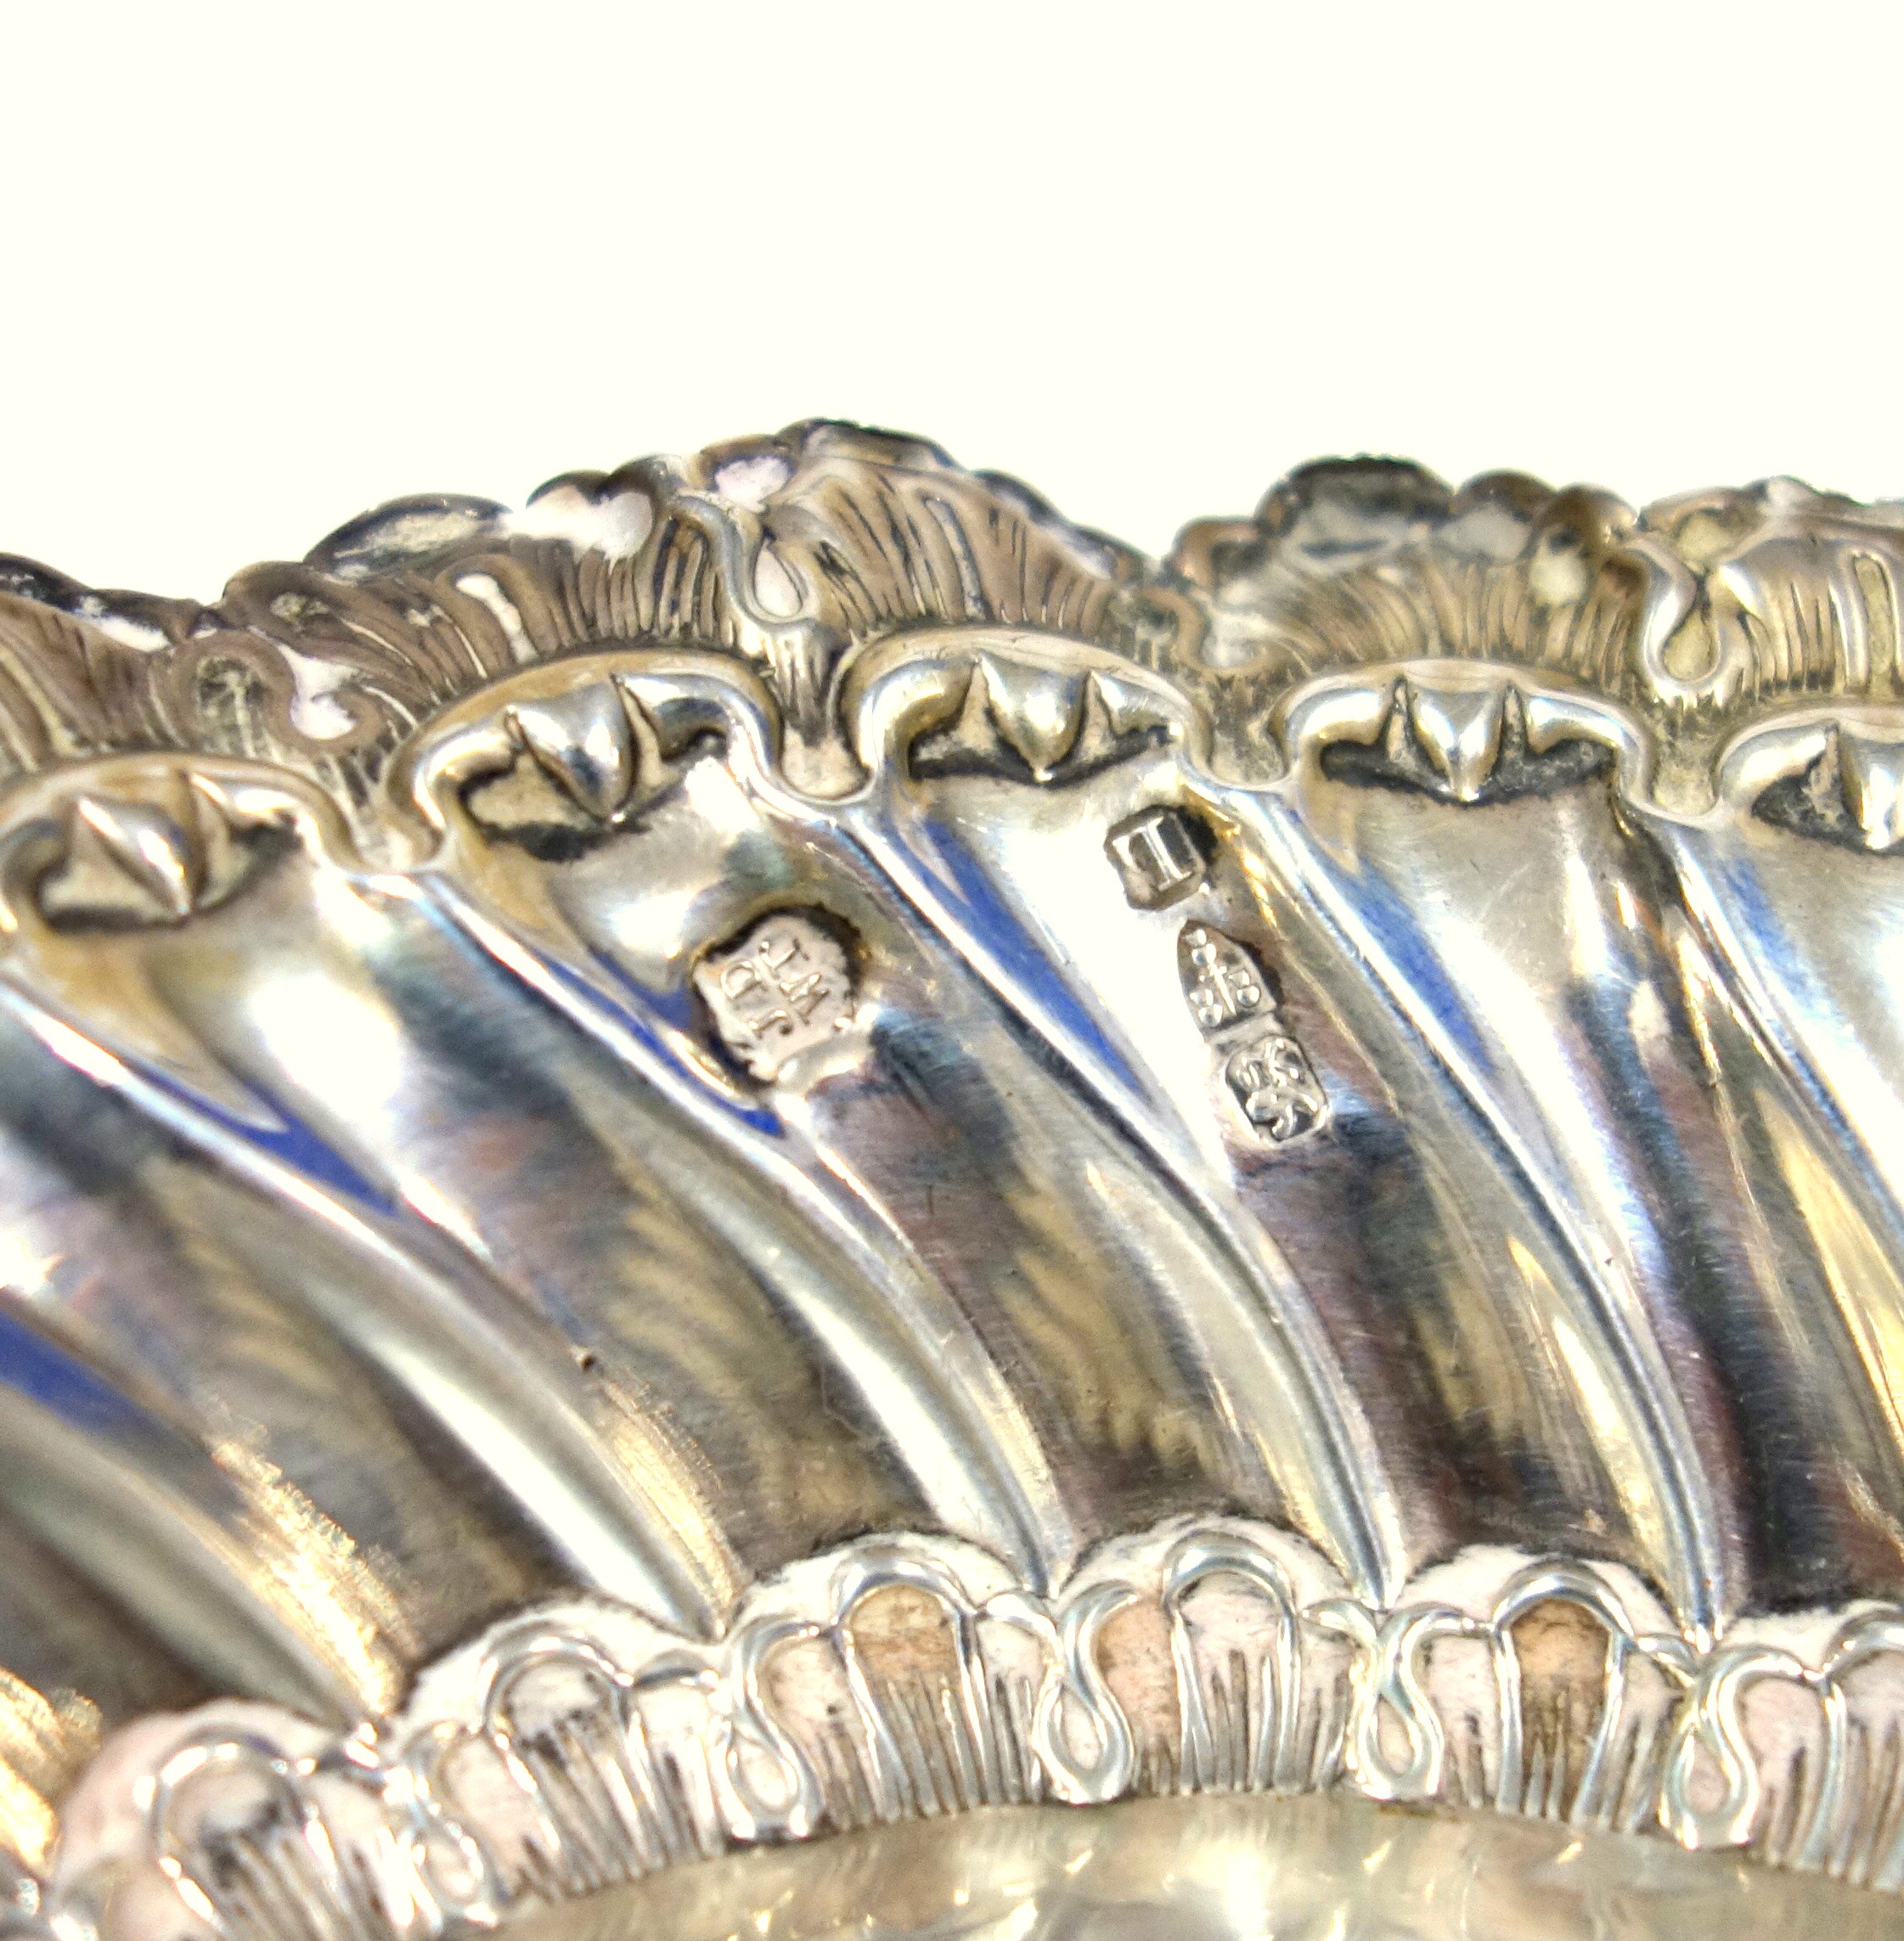 Late Victorian silver circular sweetmeat dish with embossed decoration and serrated rim, by F B Ltd. - Image 7 of 7